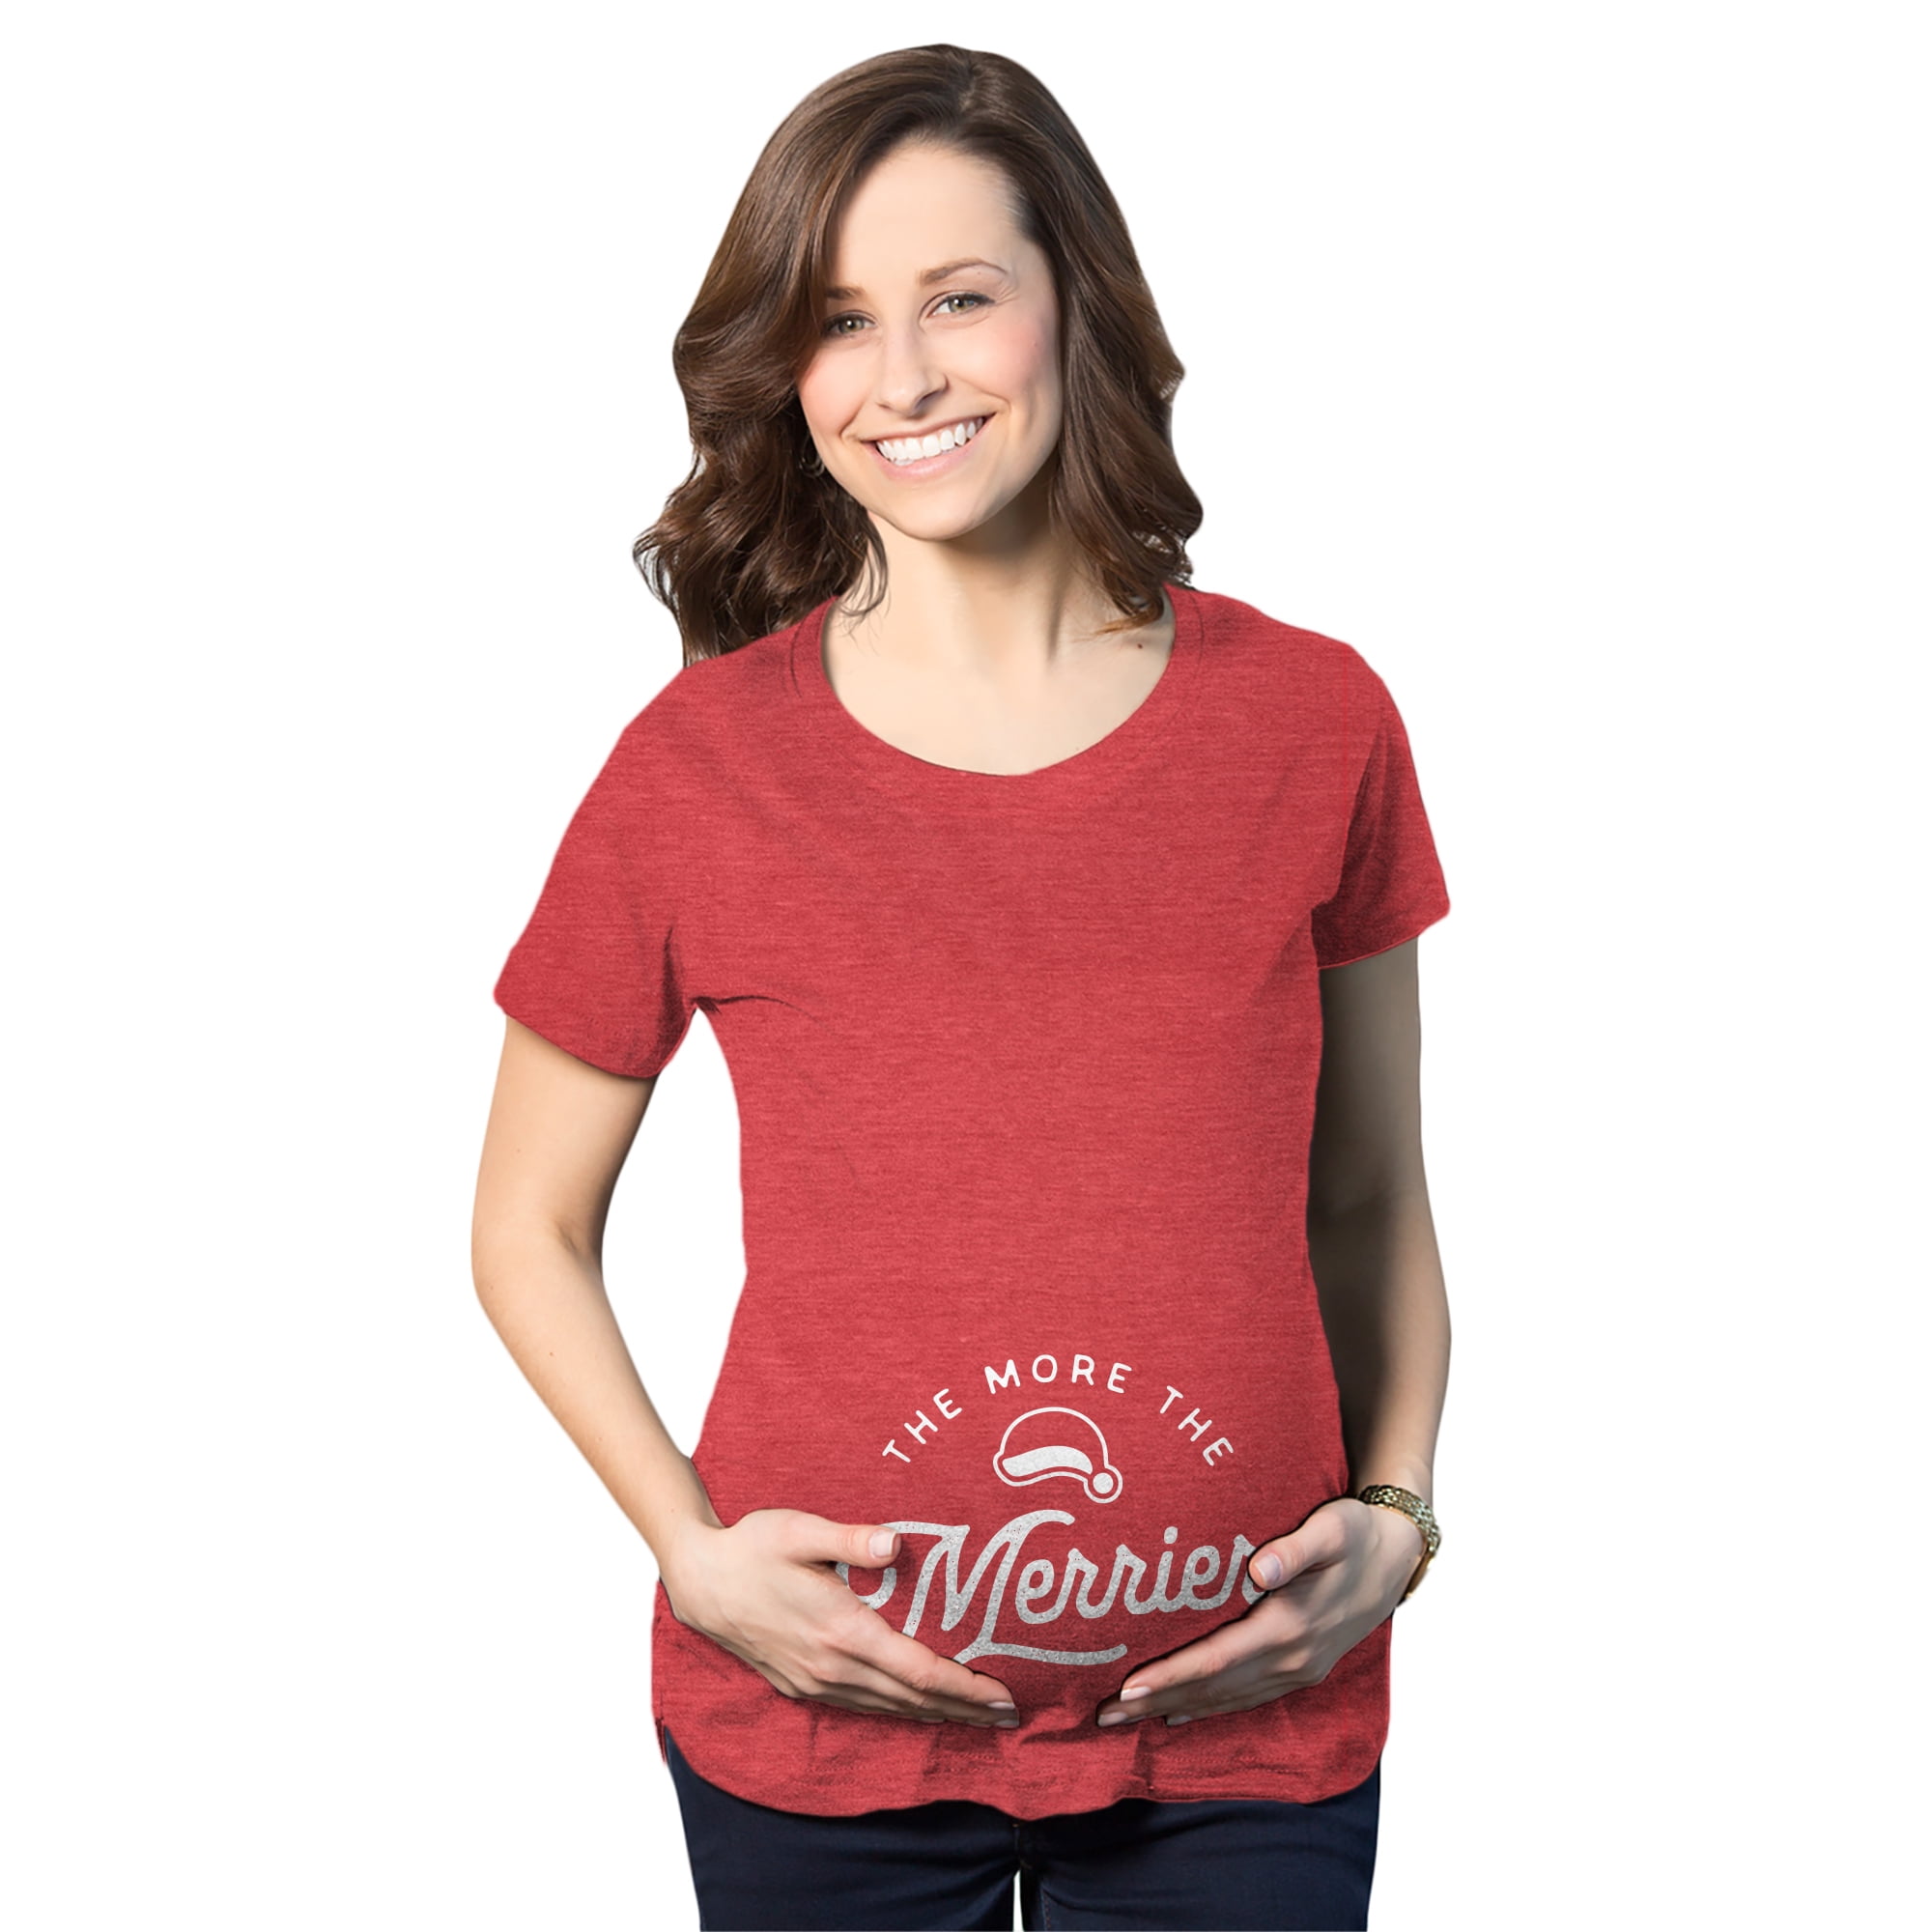 Maternity The More The Merrier Tshirt Funny Christmas Baby